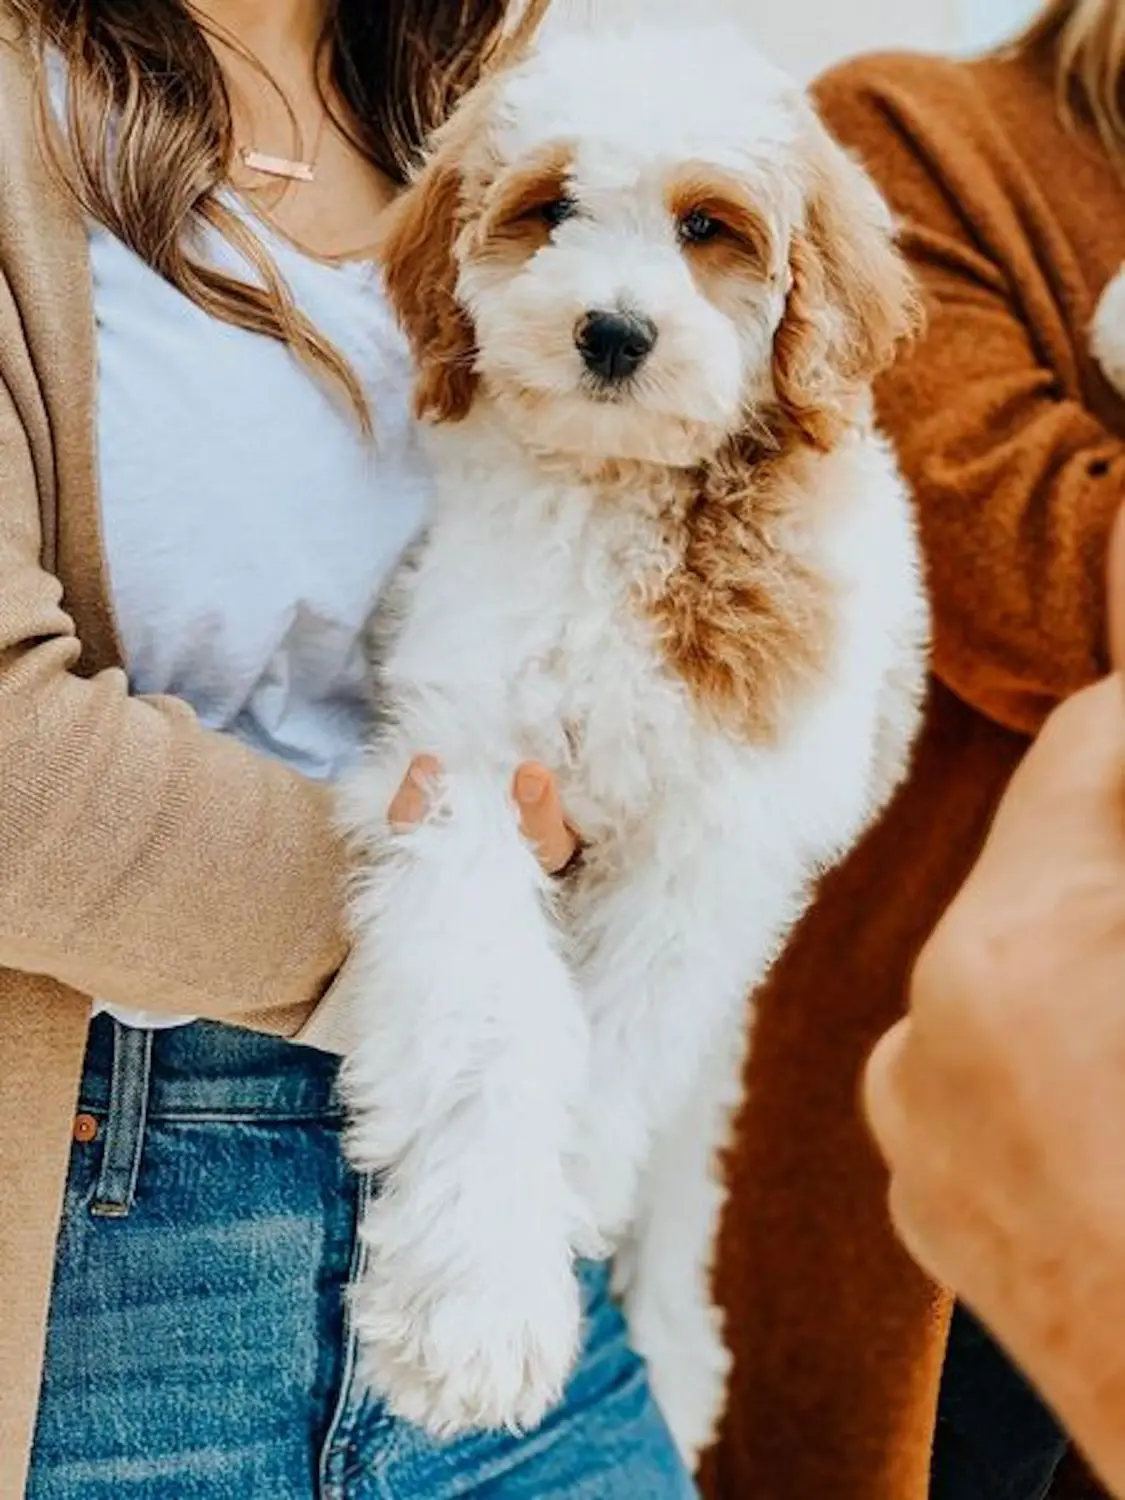 The image shows an owner holding an f1bb Goldendoodle. This dog doesn't shed fur, making it a great choice for people with allergies.